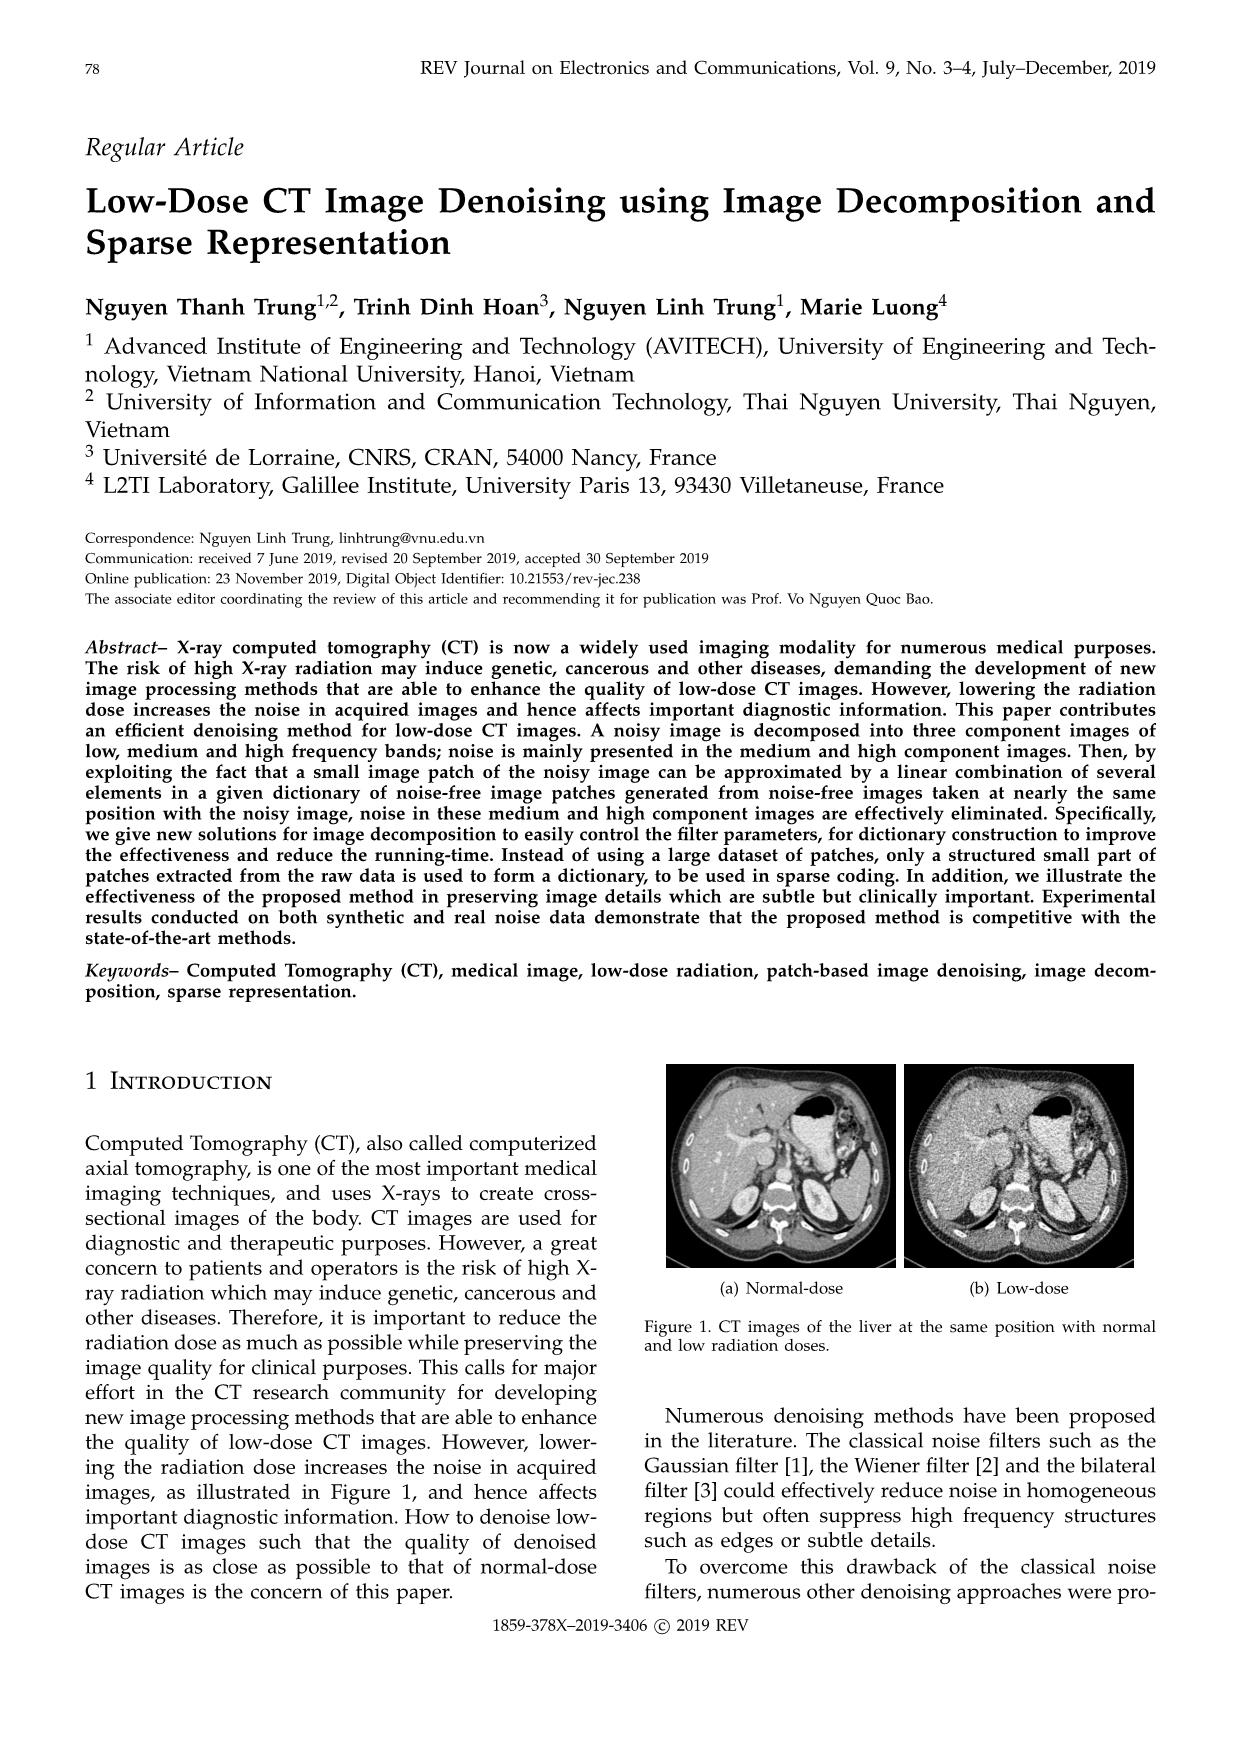 Low-Dose CT image denoising using image decomposition and sparse representation trang 1